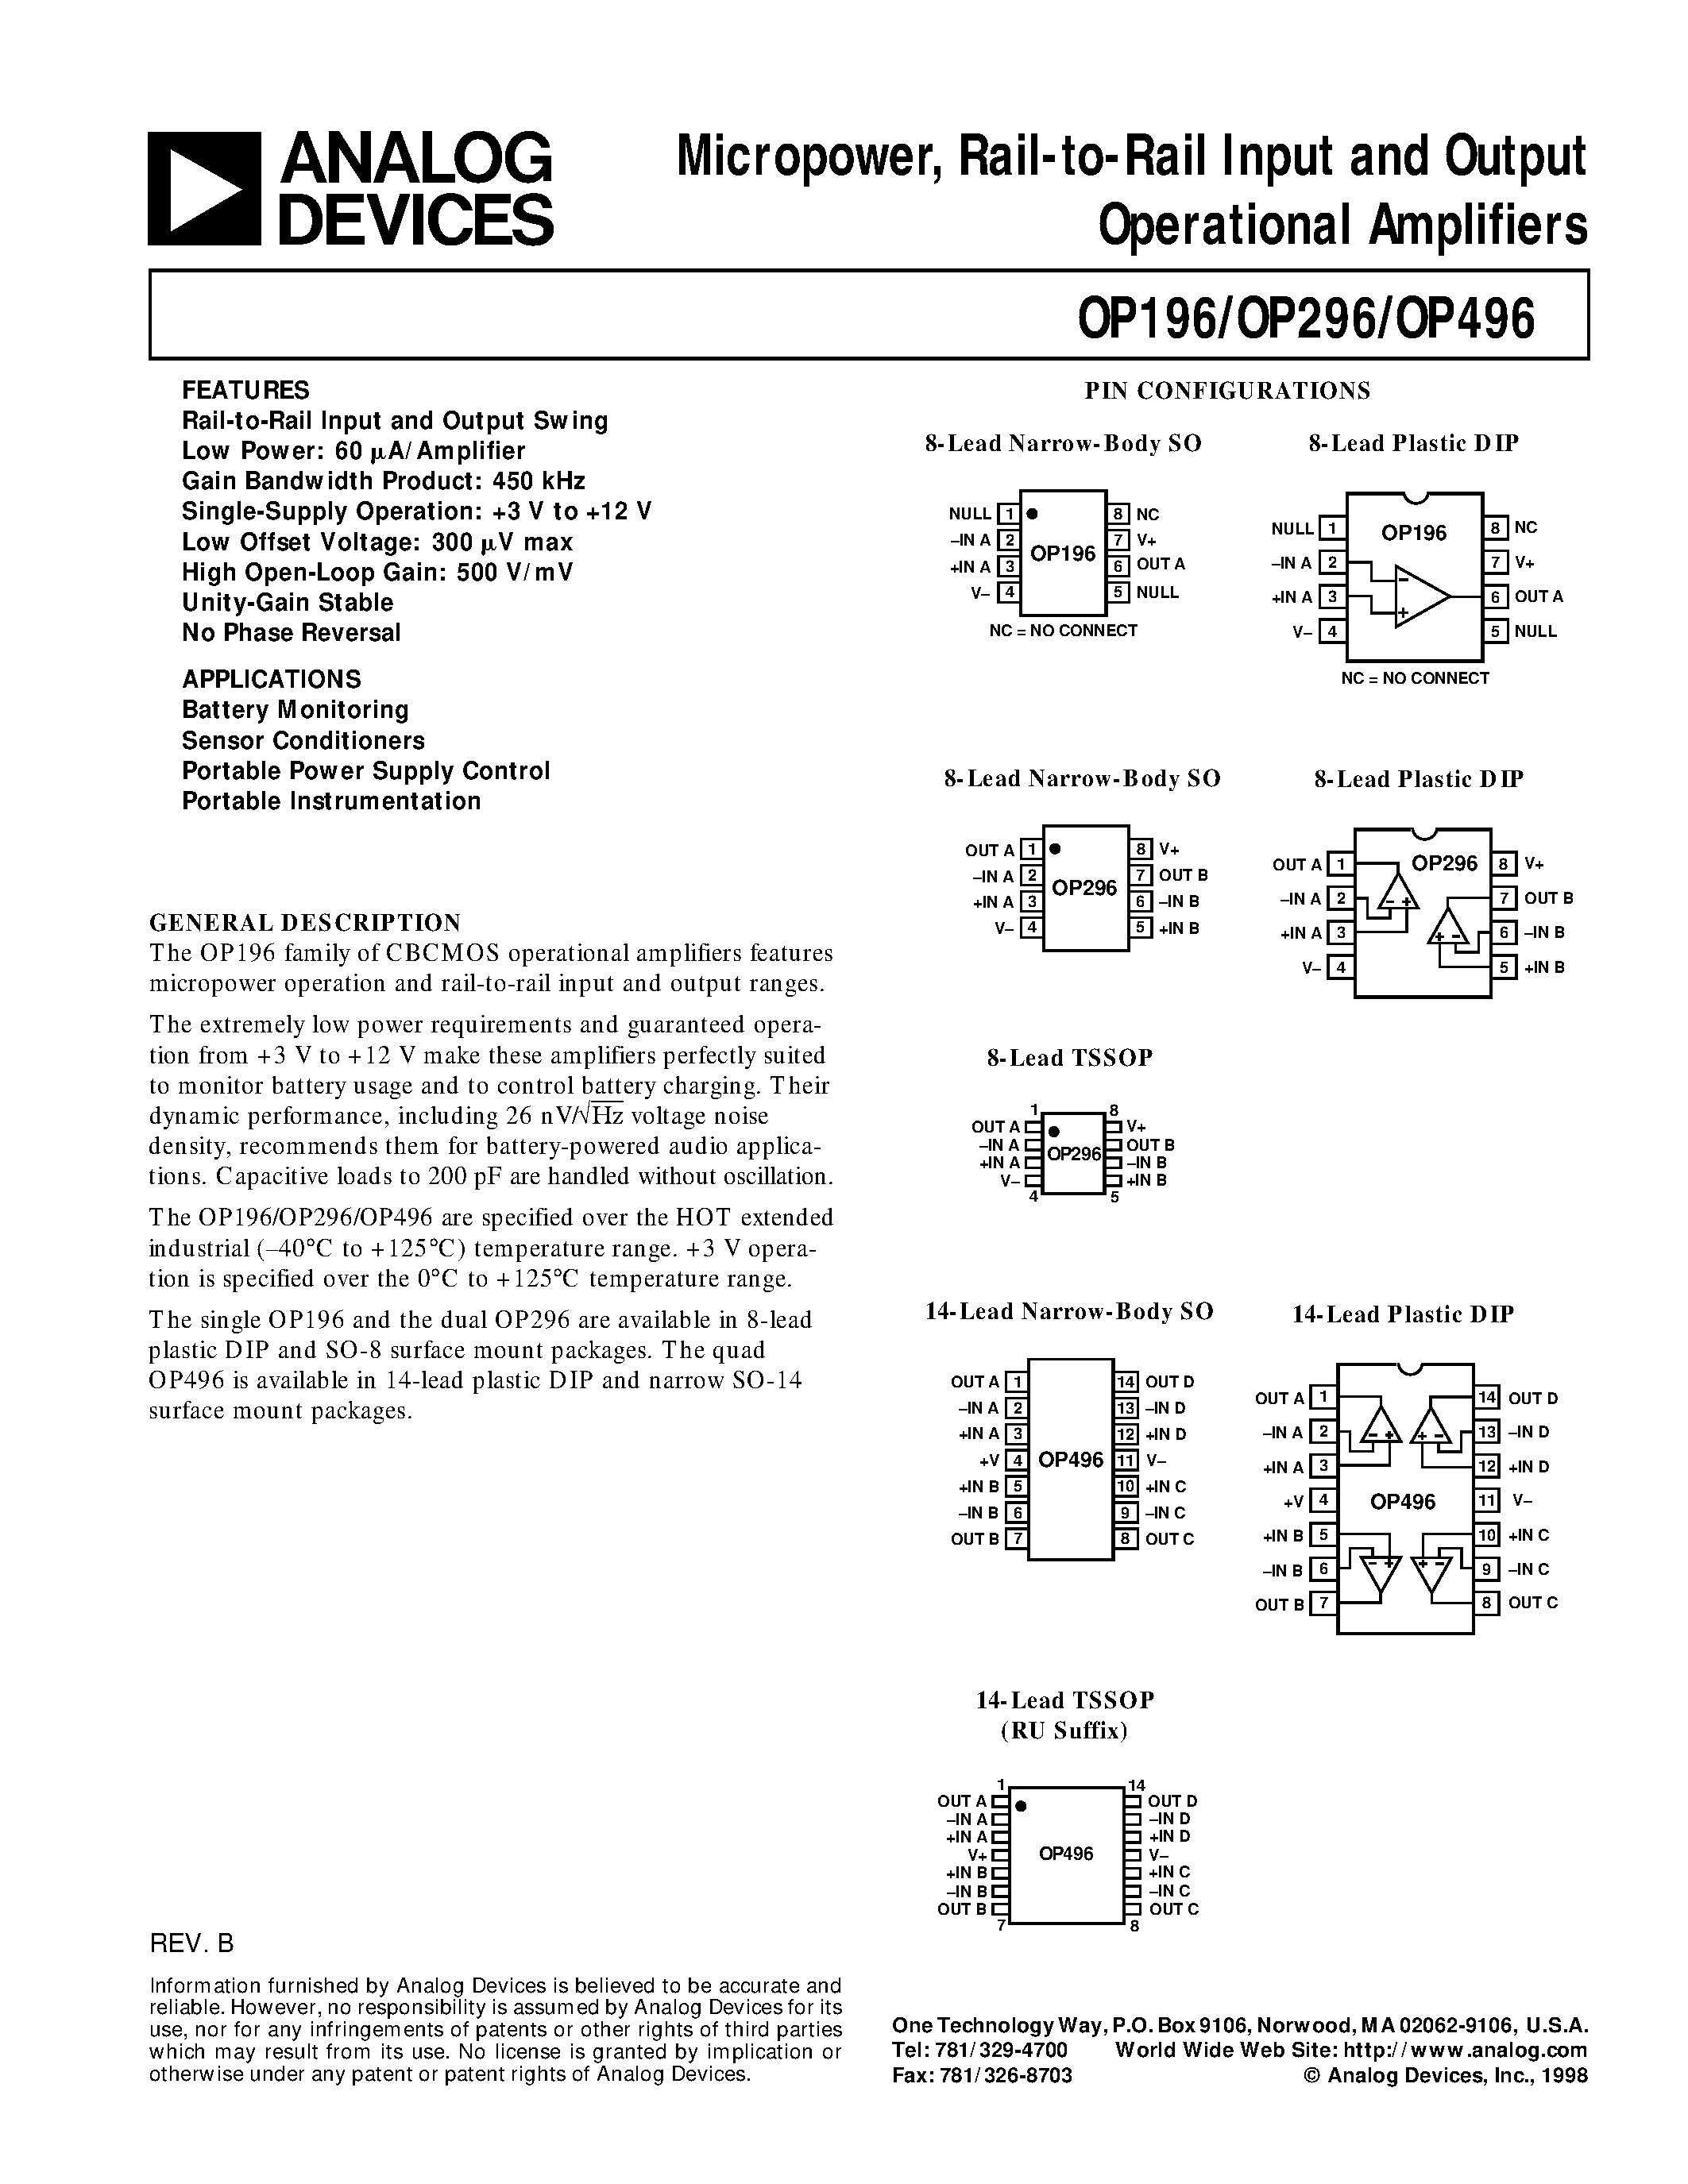 Datasheet OP296 - Micropower / Rail-to-Rail Input and Output Operational Amplifiers page 1